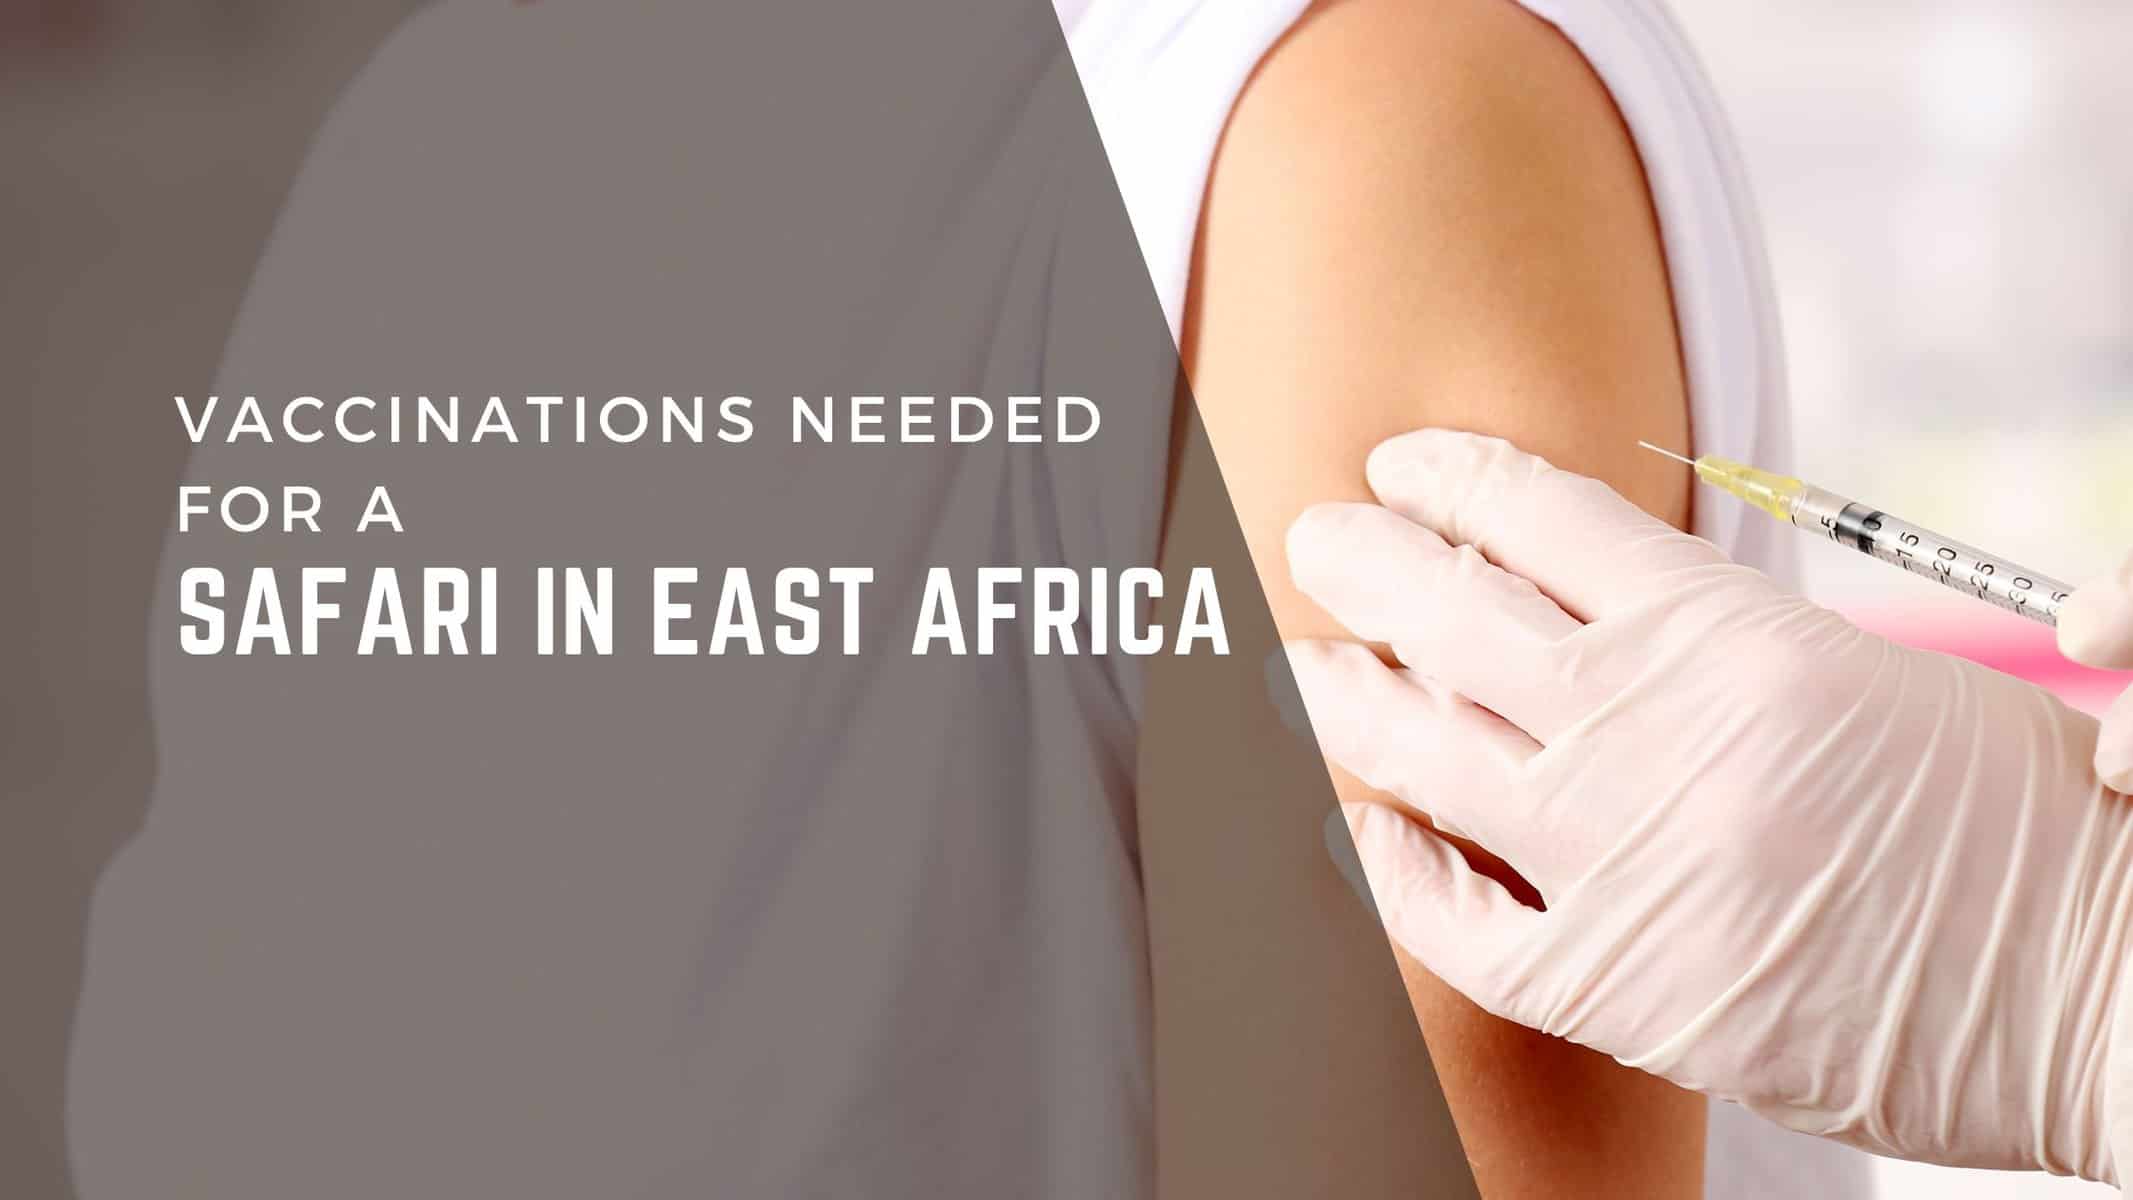 Vaccinations needed for a safari in East Africa